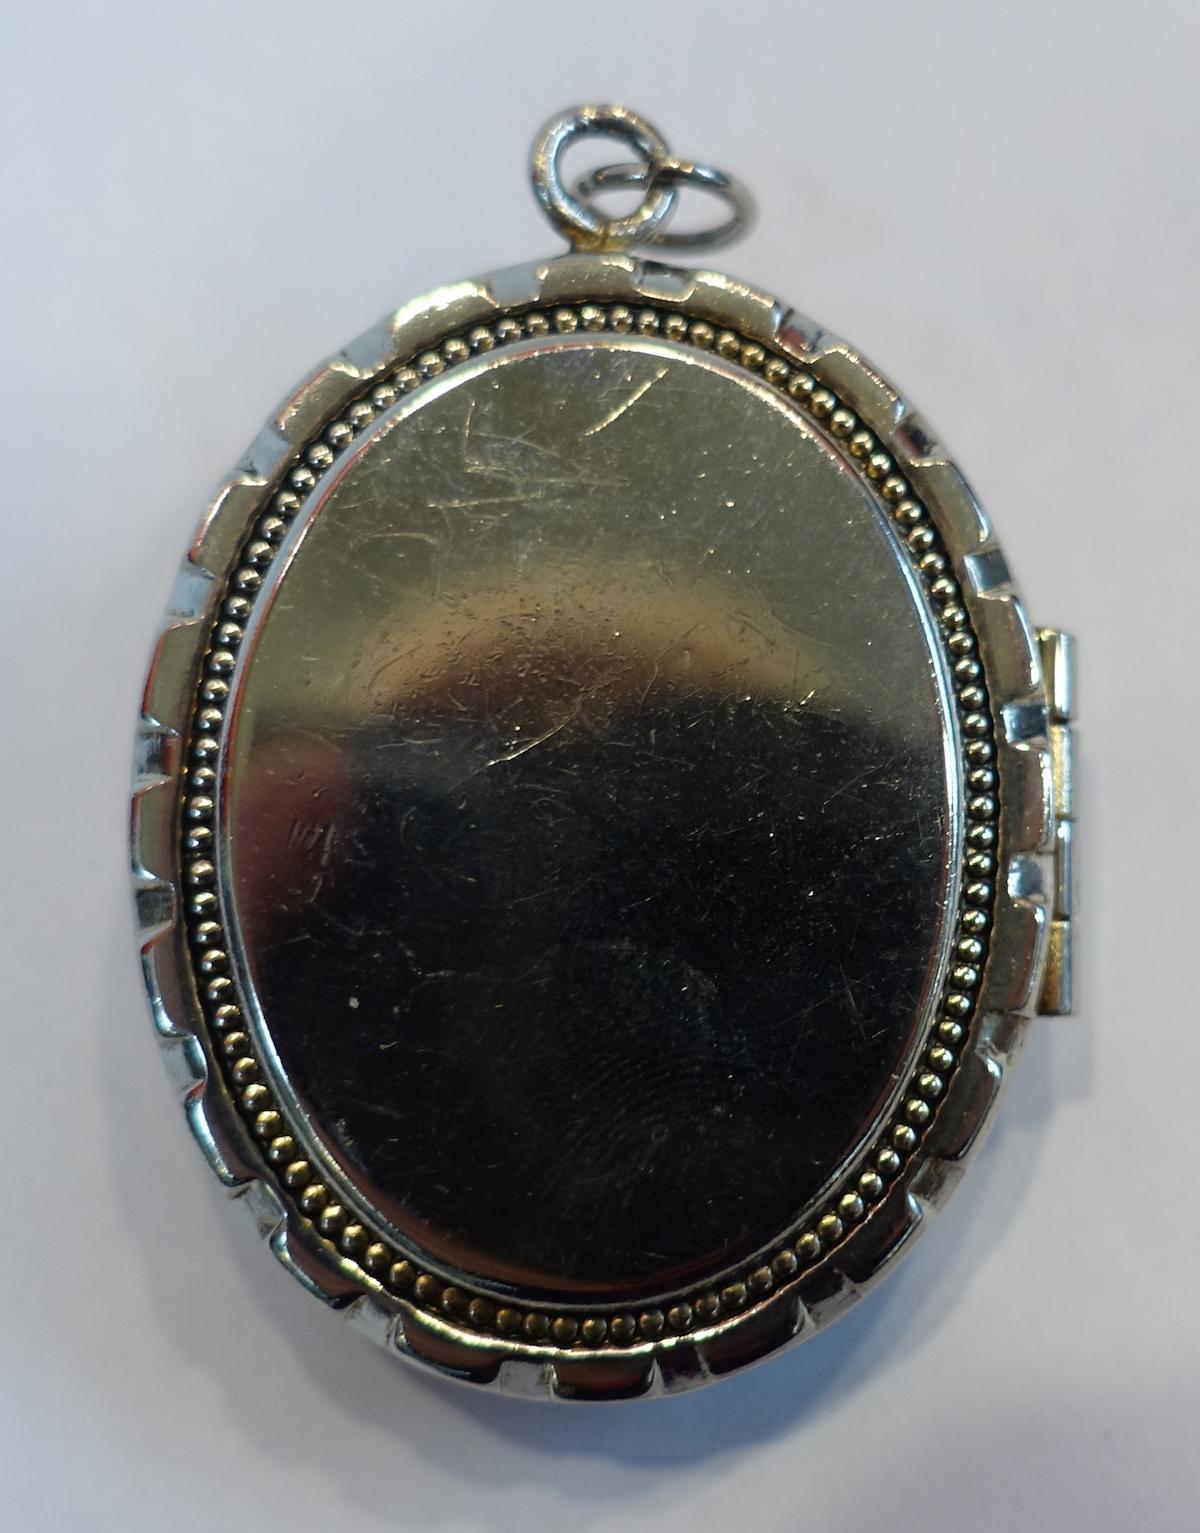 This vintage pendant features a locket with a heavily carved angels design in a silver tone setting.  In excellent condition, this locket pendant measures 1-3/4” x 1-3/8”.